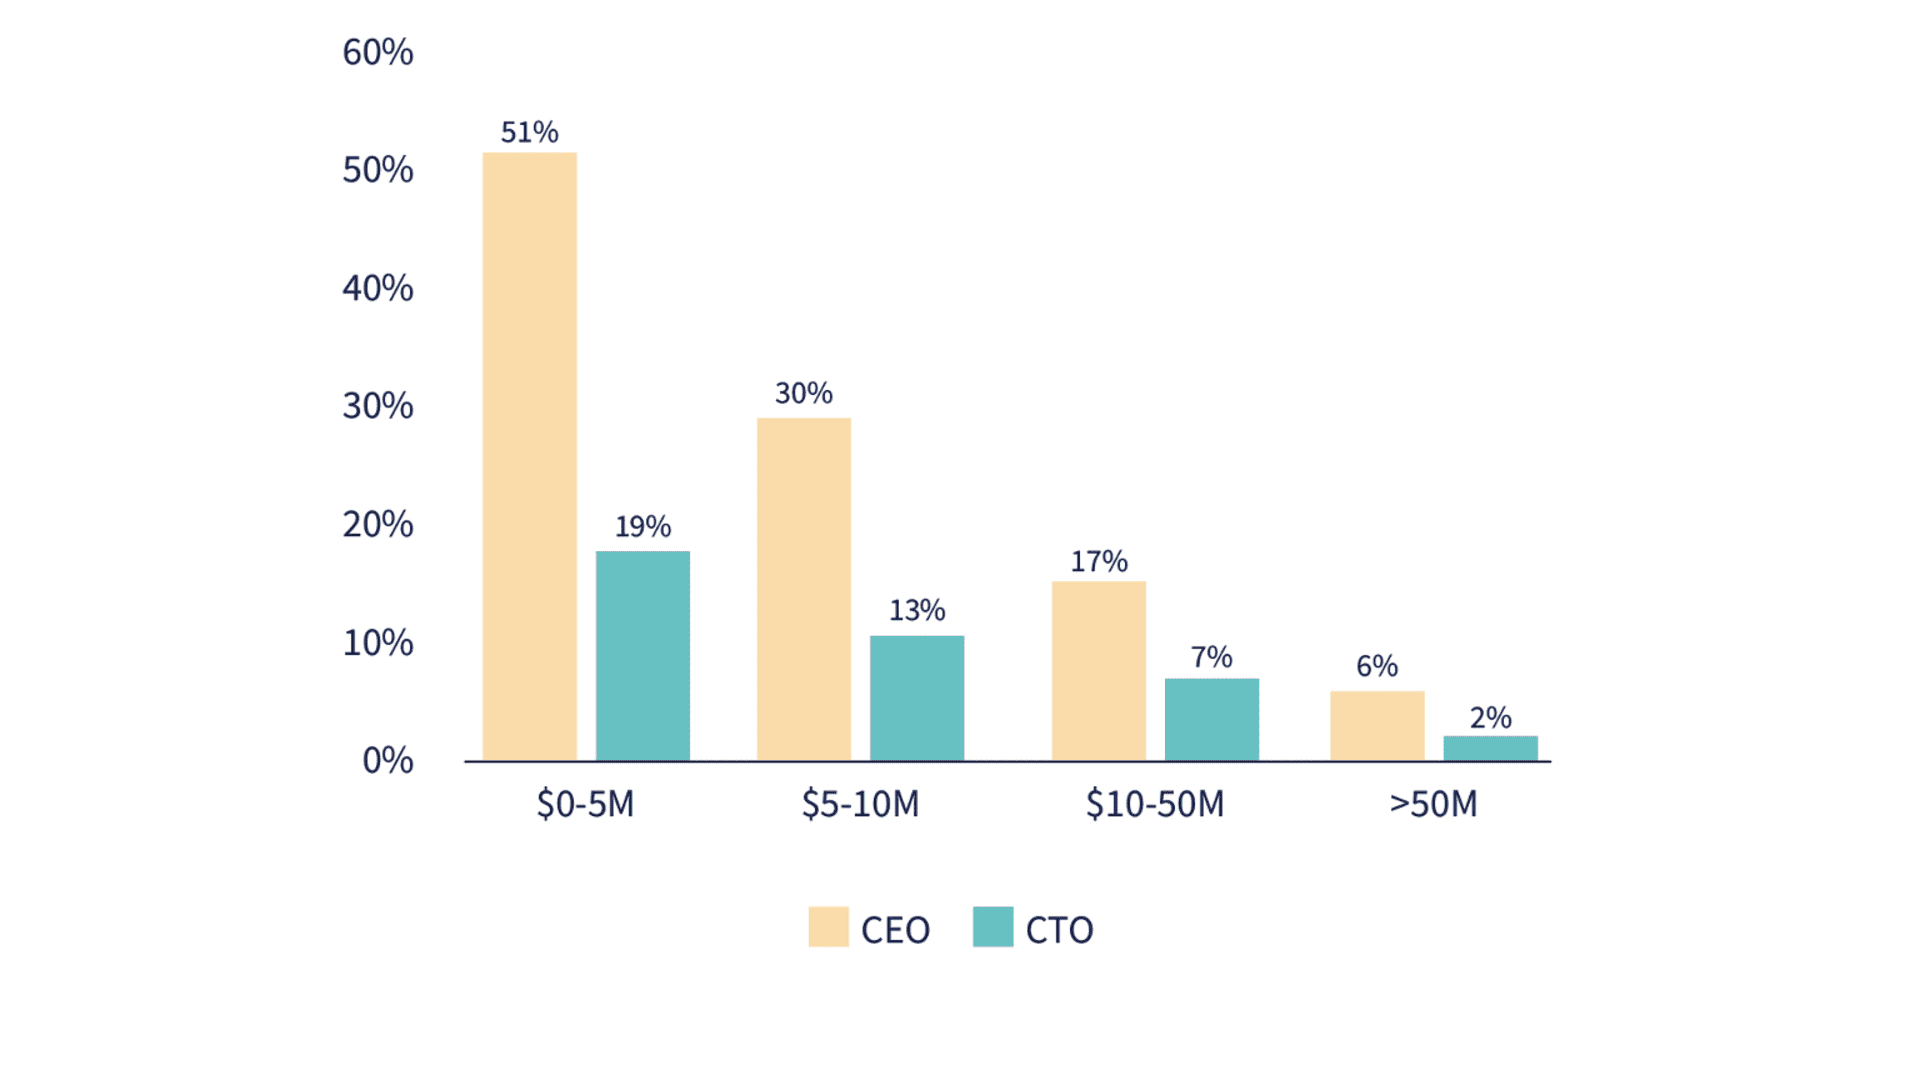 Average equity ownership by funding stage, CEO vs. CTO.